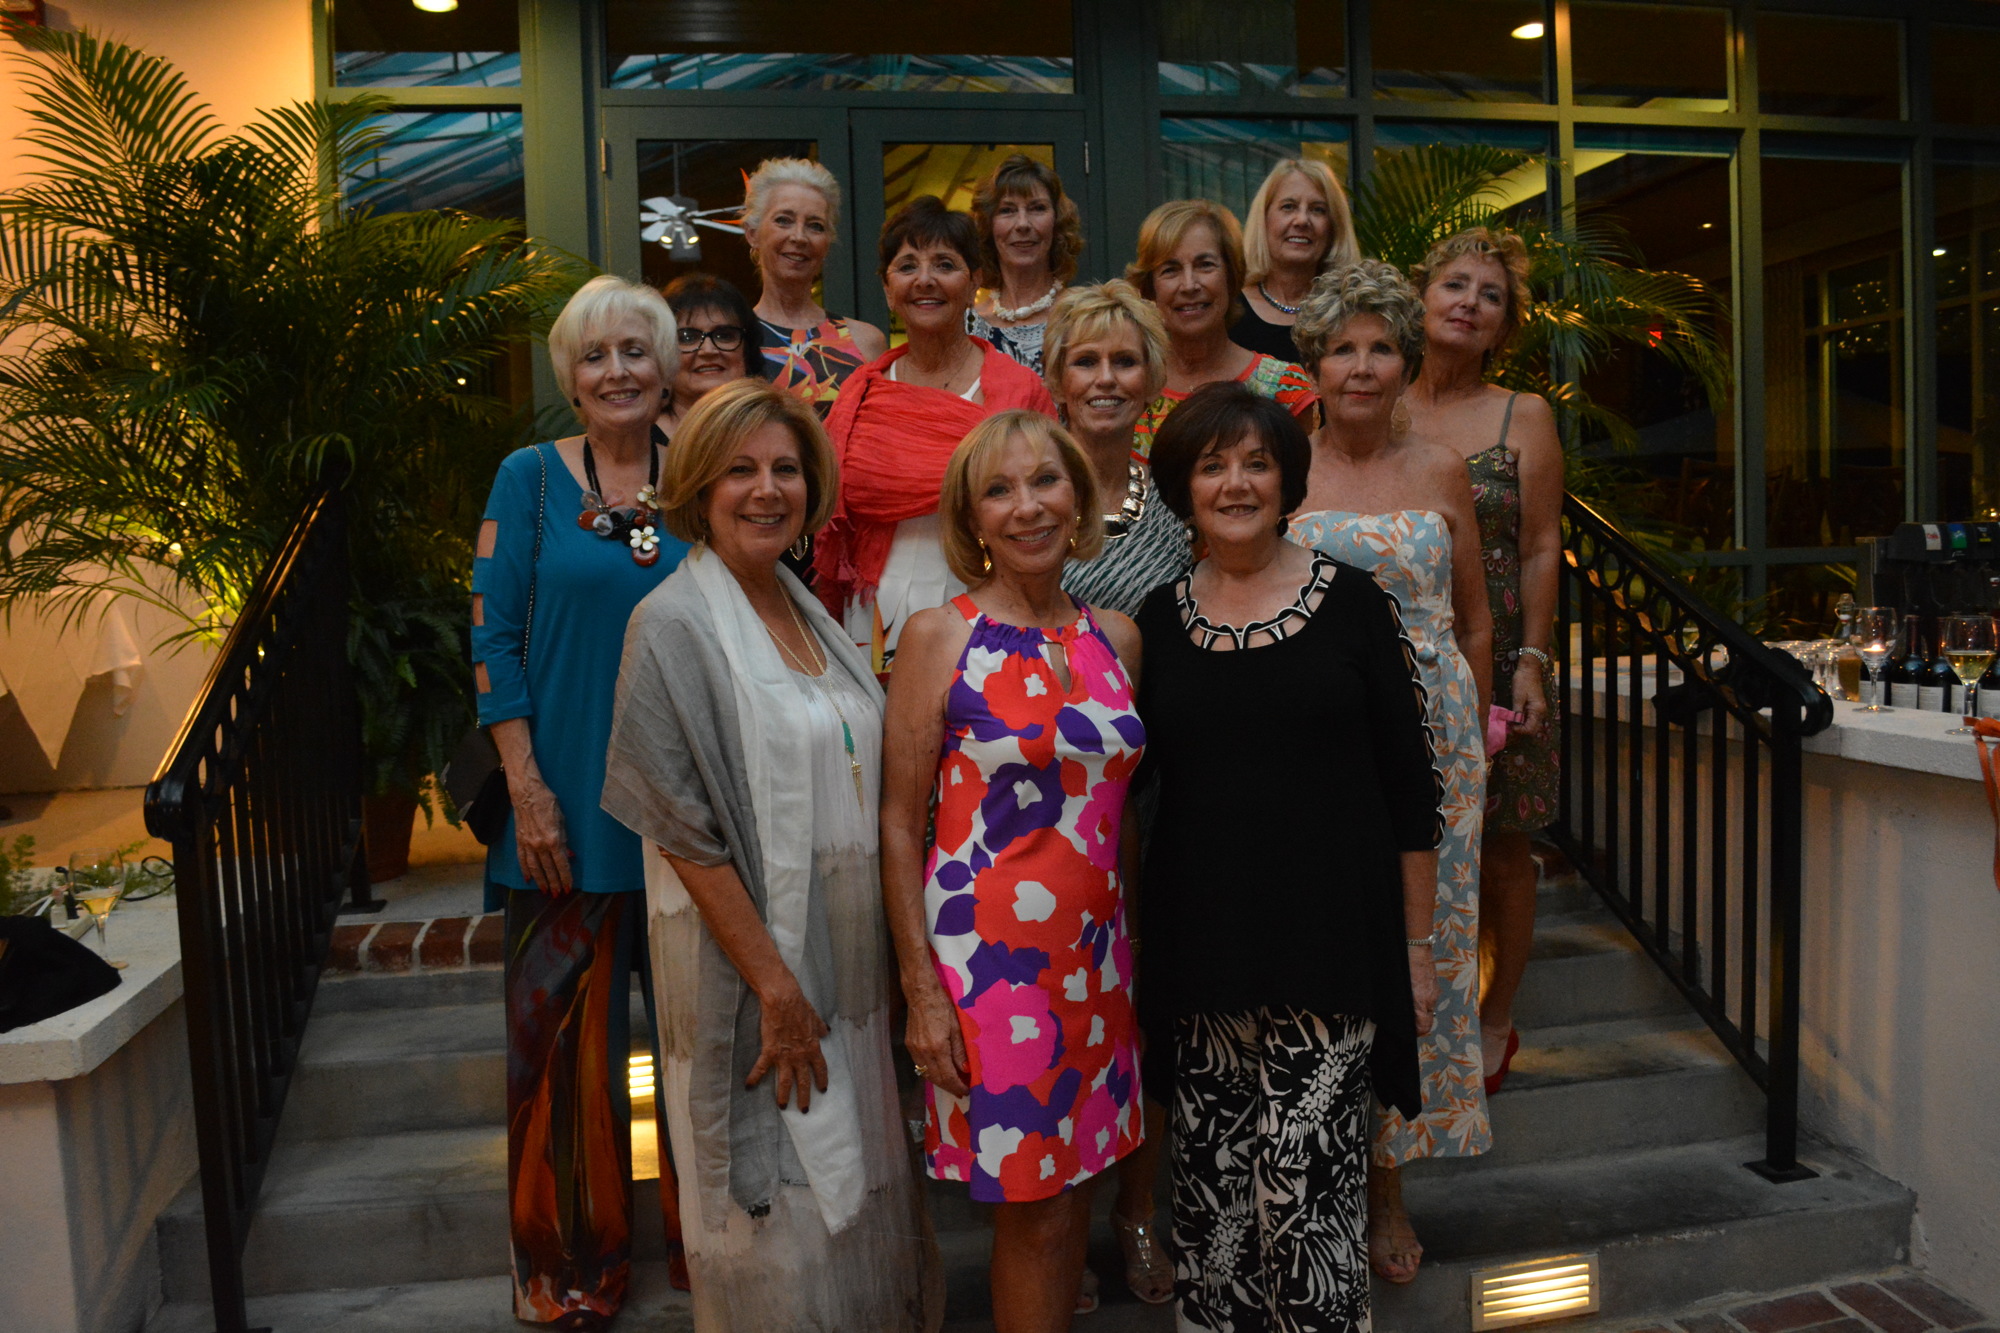 The University Park Women'     s Club event committee makes sure to take a photograph together.